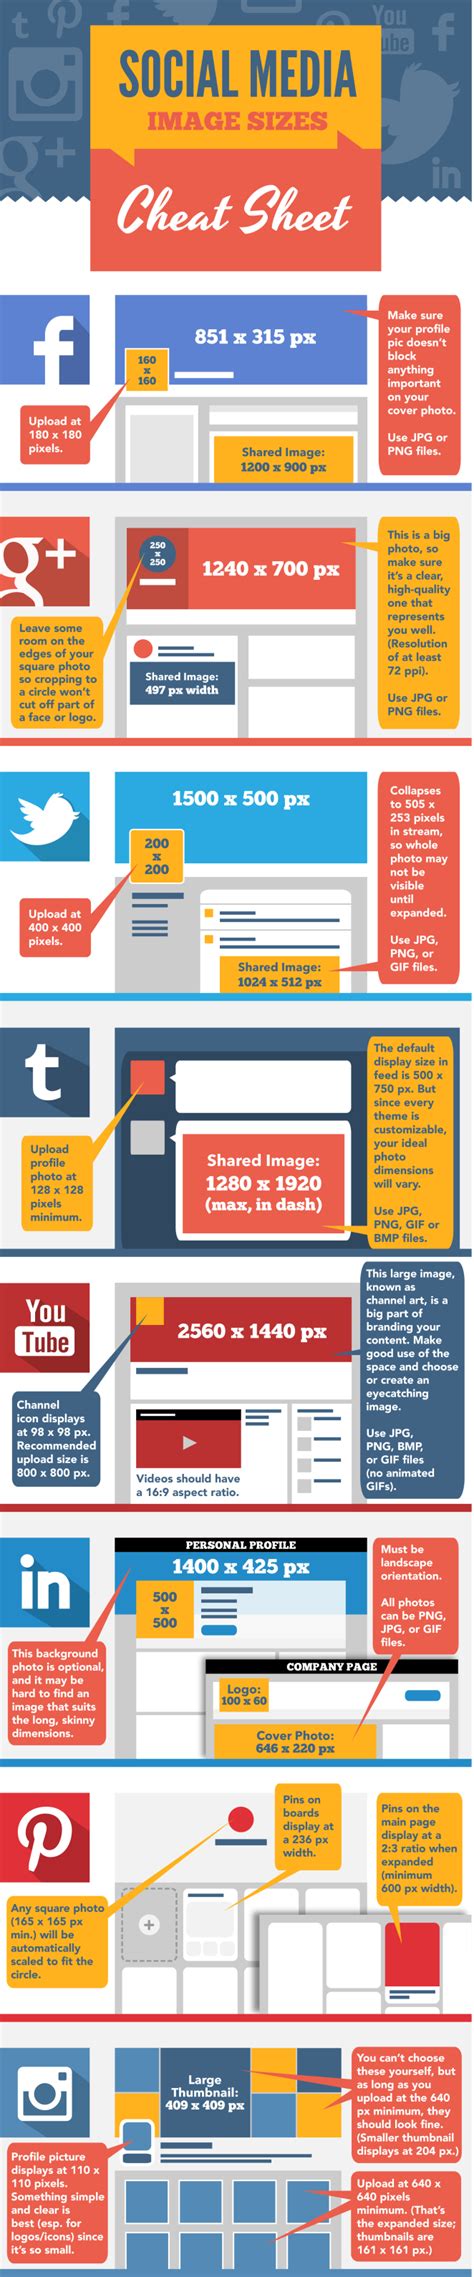 The Complete Social Media Image Size Cheat Sheet Infographic Our Blog